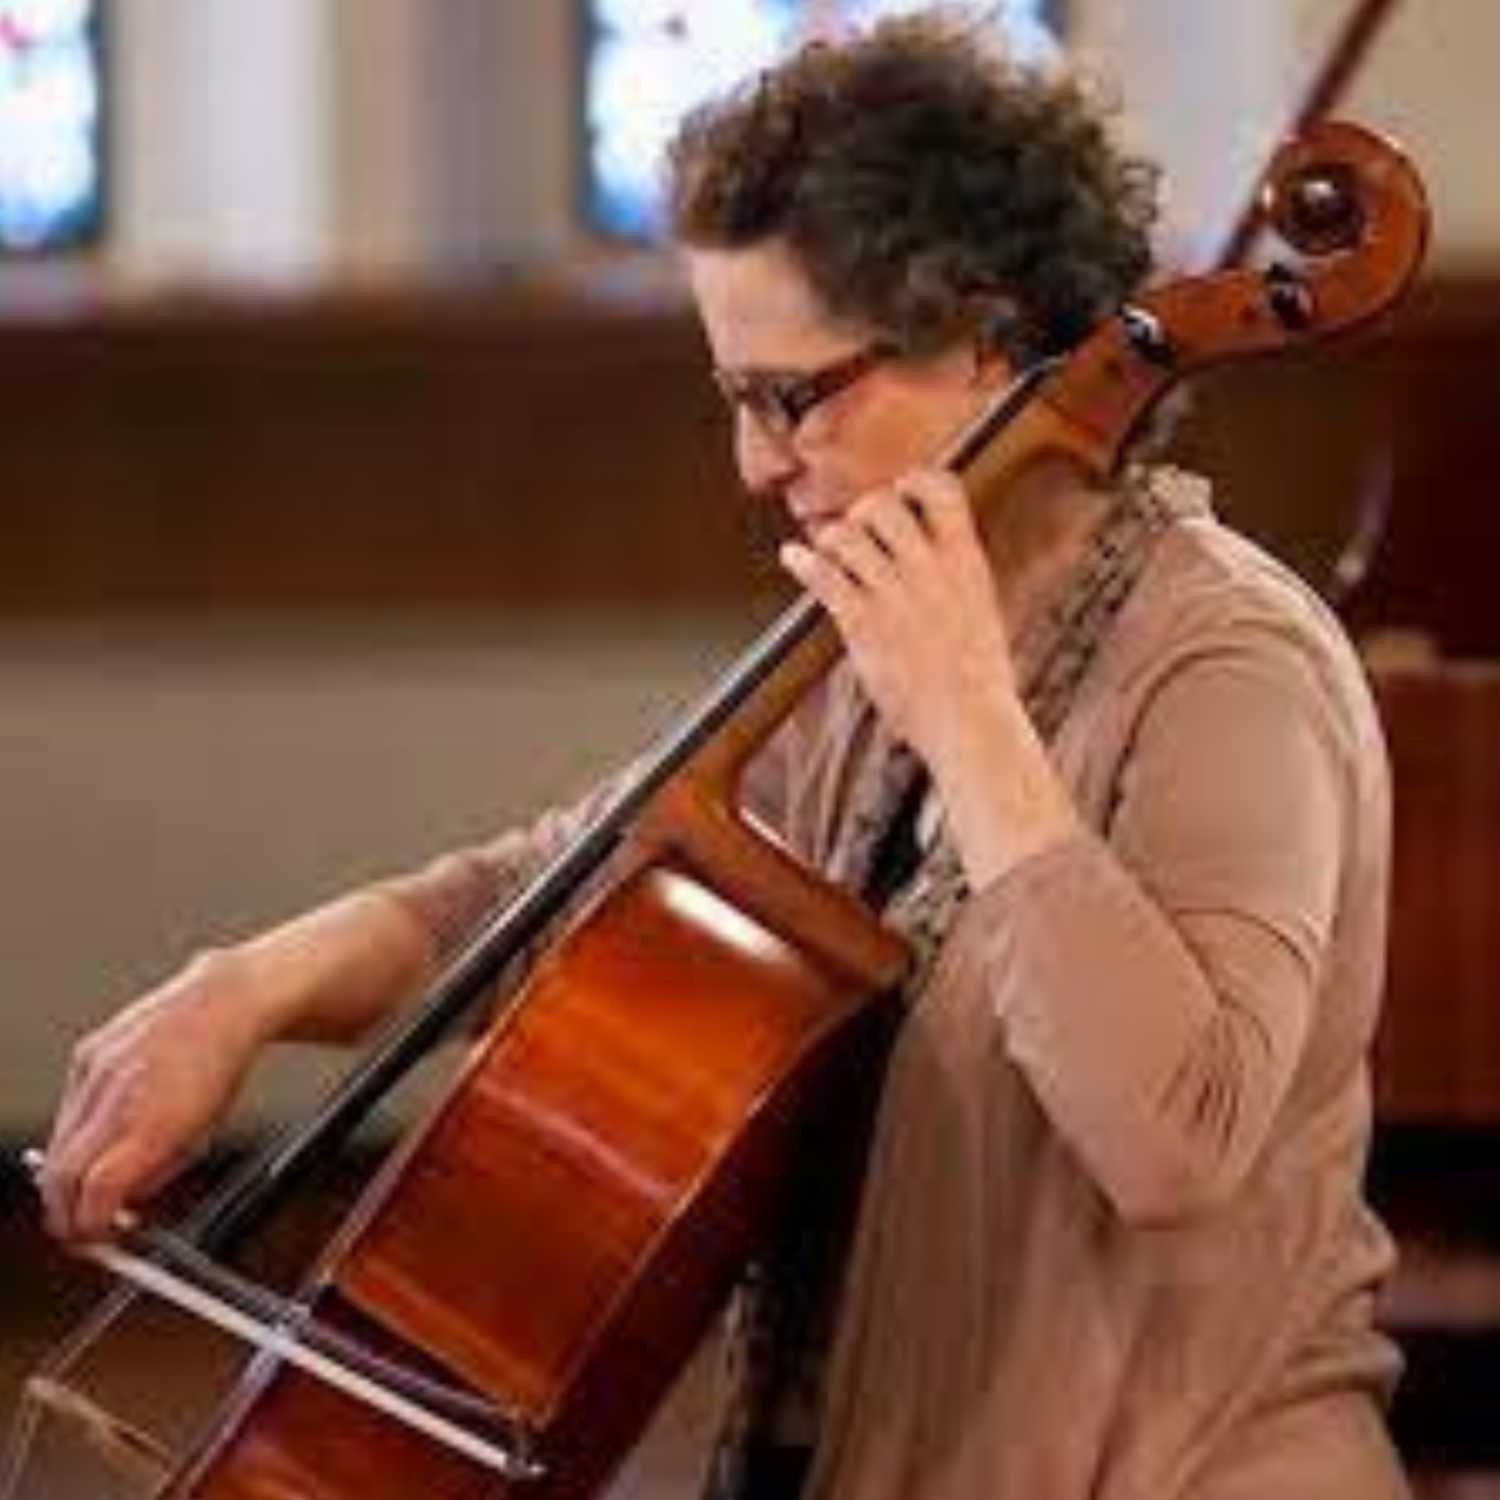 Mollie Glazer, professional cellist & music teacher, recalls her early training and how those experiences have impacted the instruction she provides to her students.